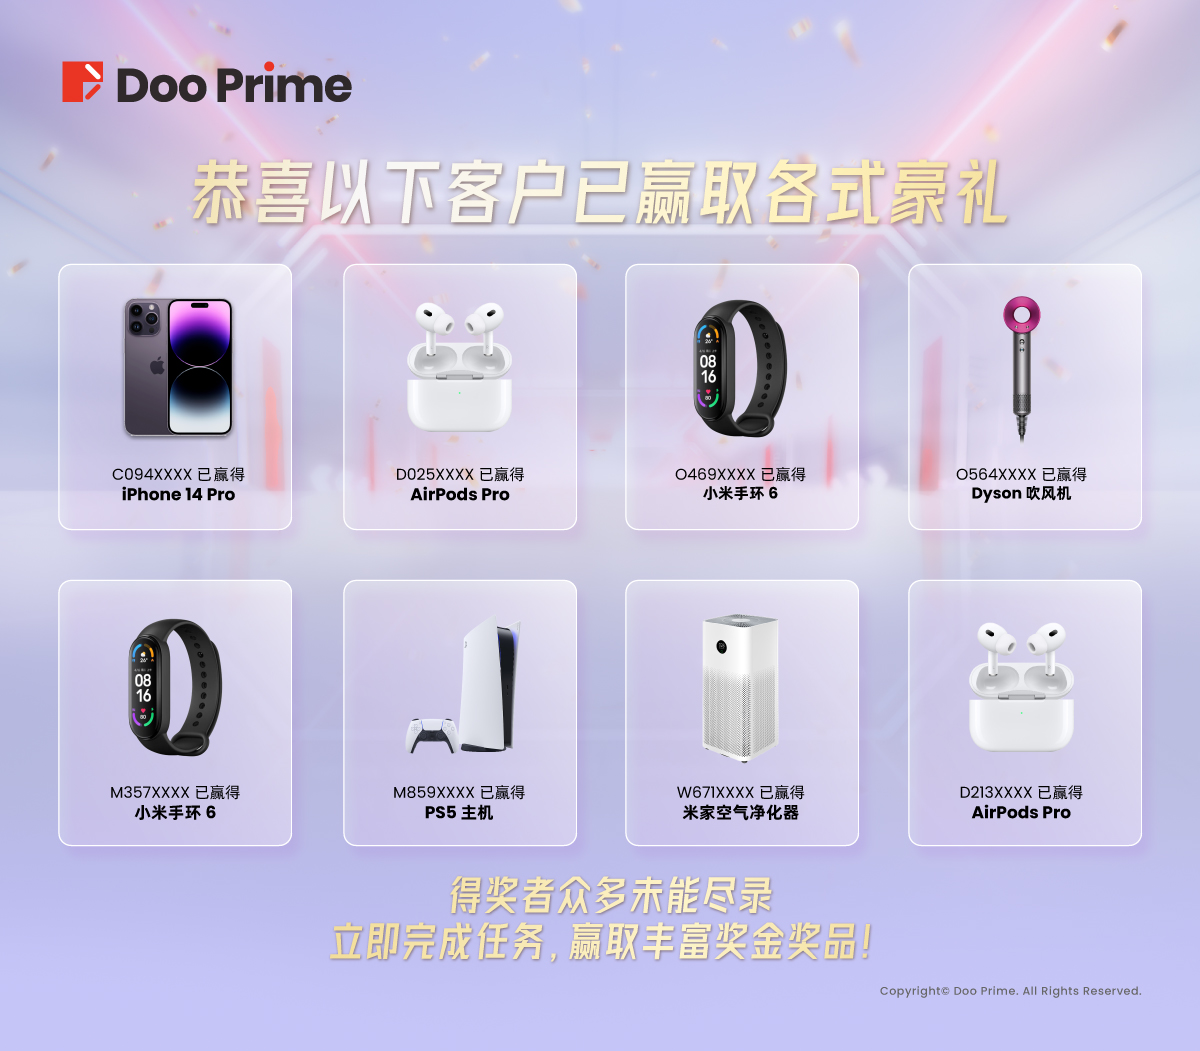 DP22158-Lucky-Draw-Promotion_Article2_Content-Visual_1200x1051px_CN.jpg